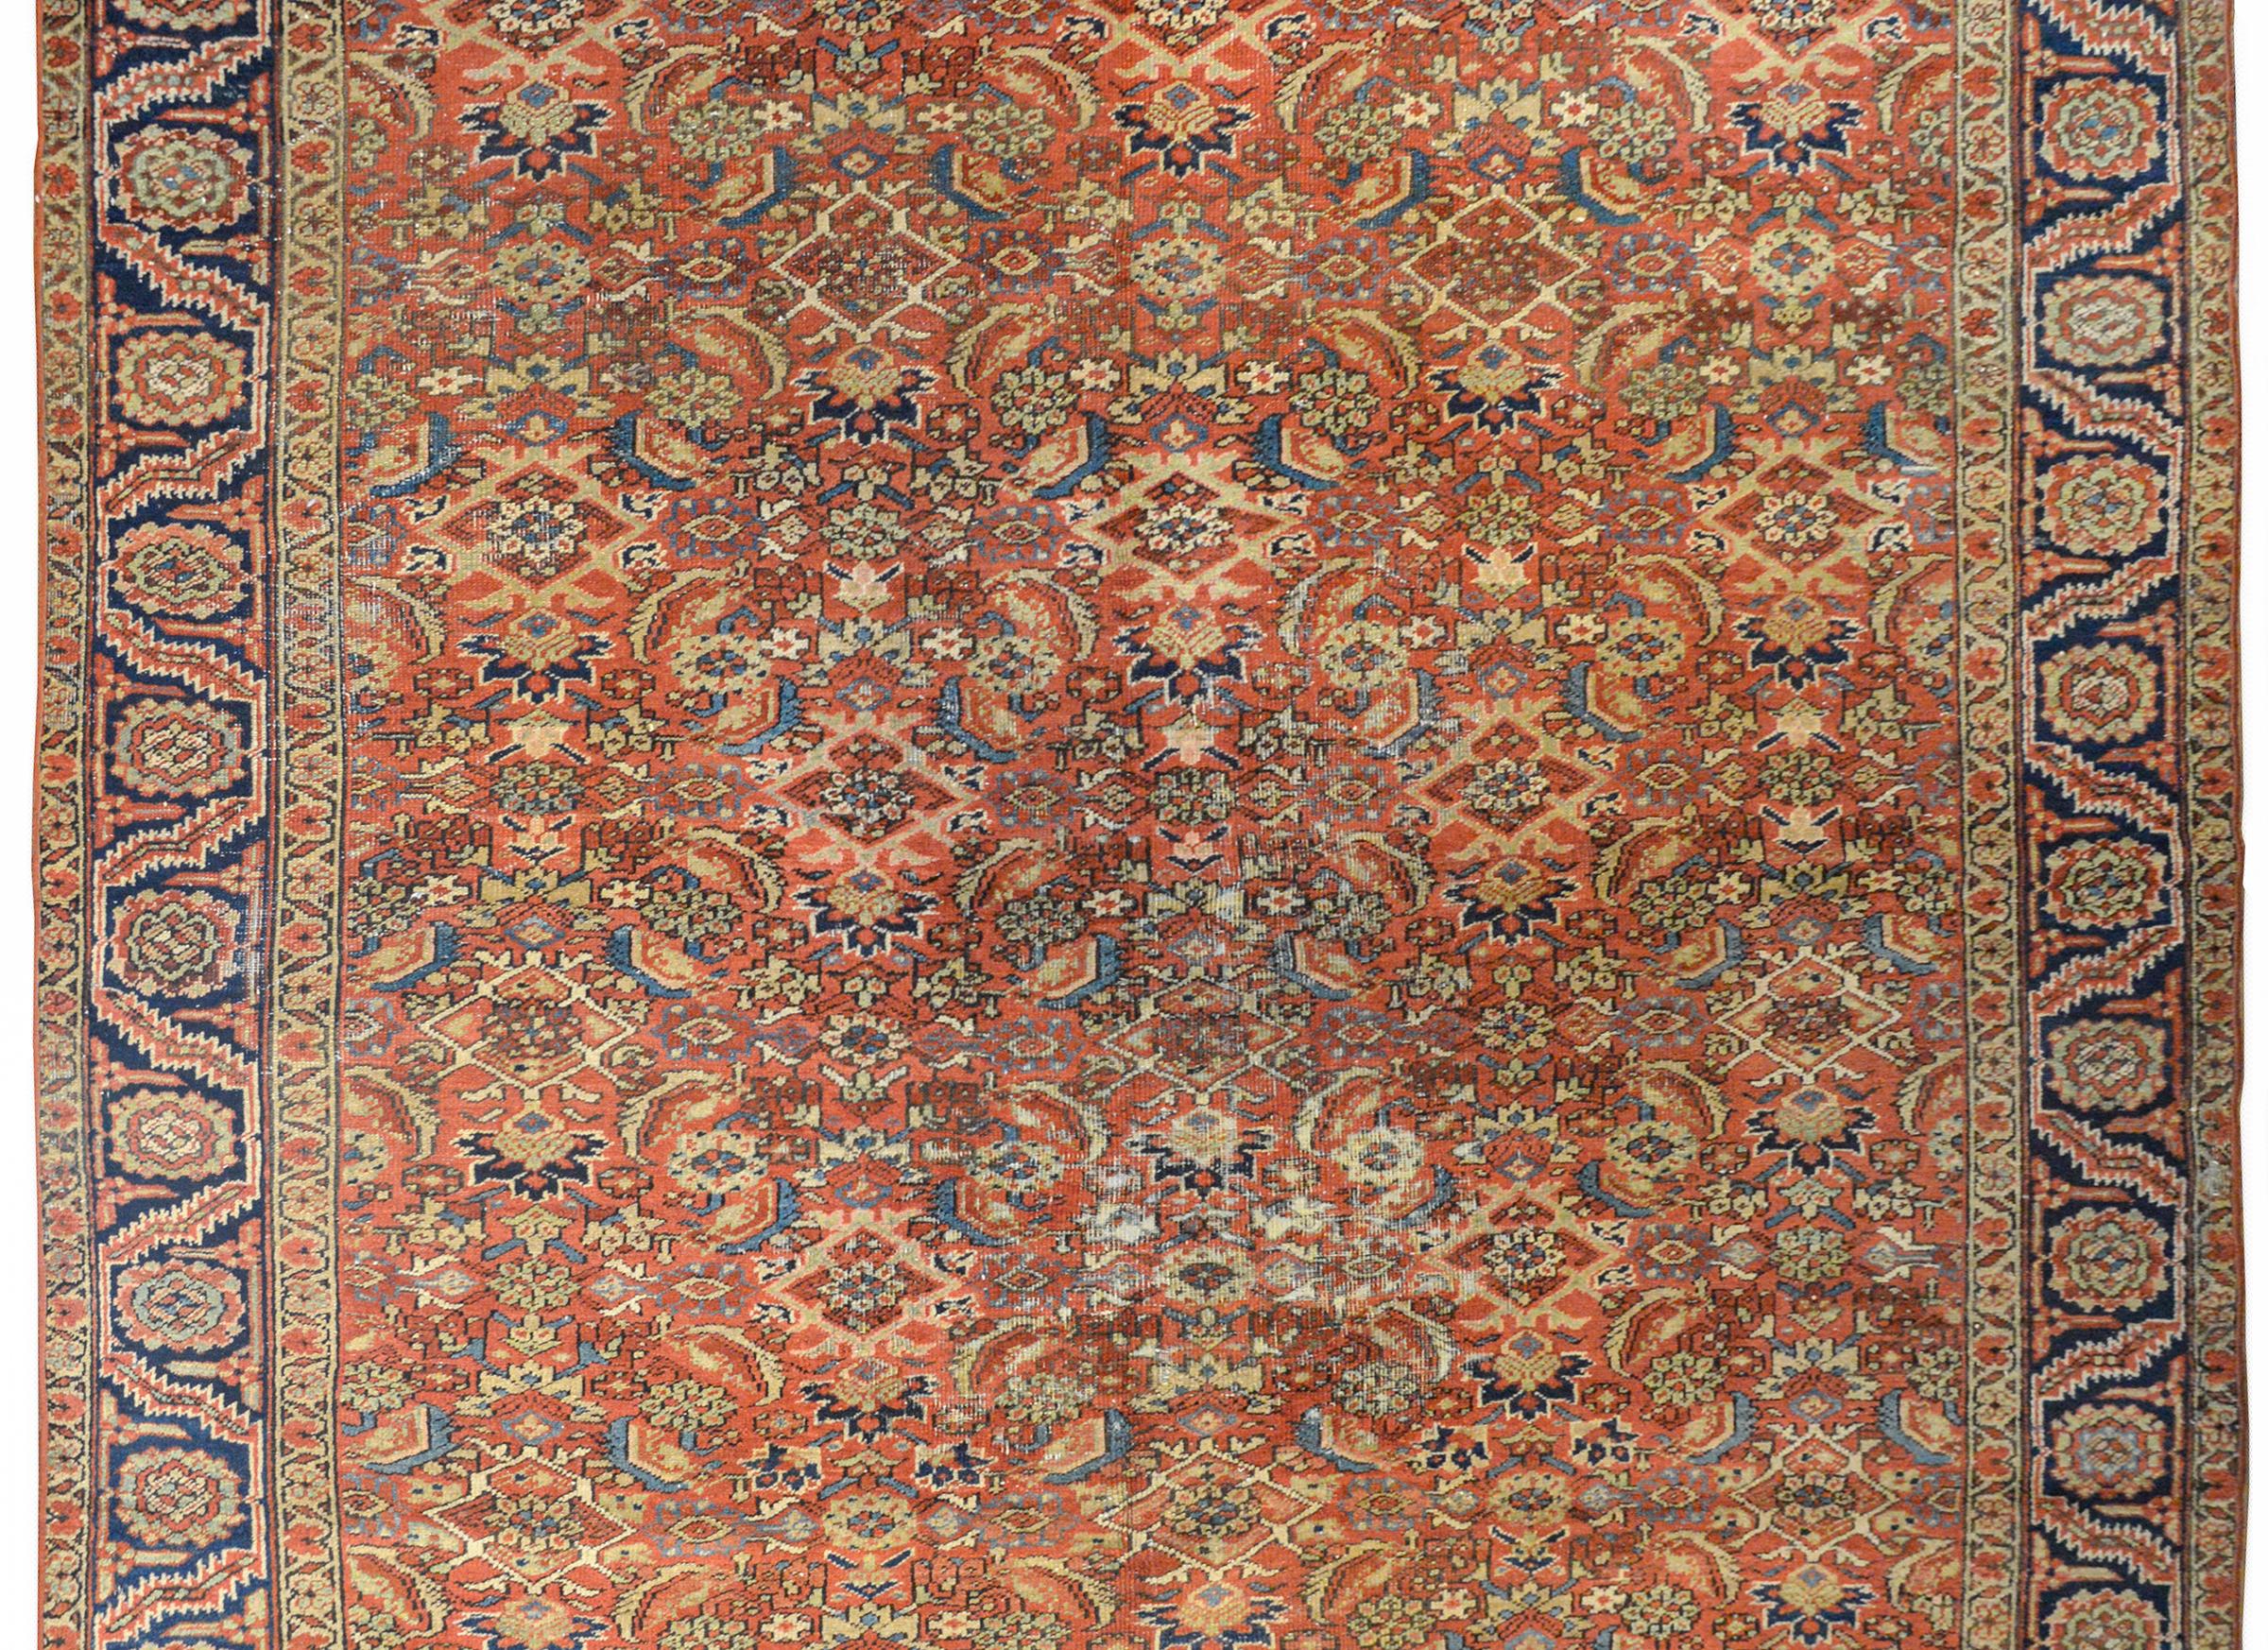 A beautiful early 20th century Persian Heriz rug with an all-over repeated floral pattern woven in light and dark indigo, cream, and pink colors on a coral colored background. The border is wonderful with a repeated large-scale floral and leaf